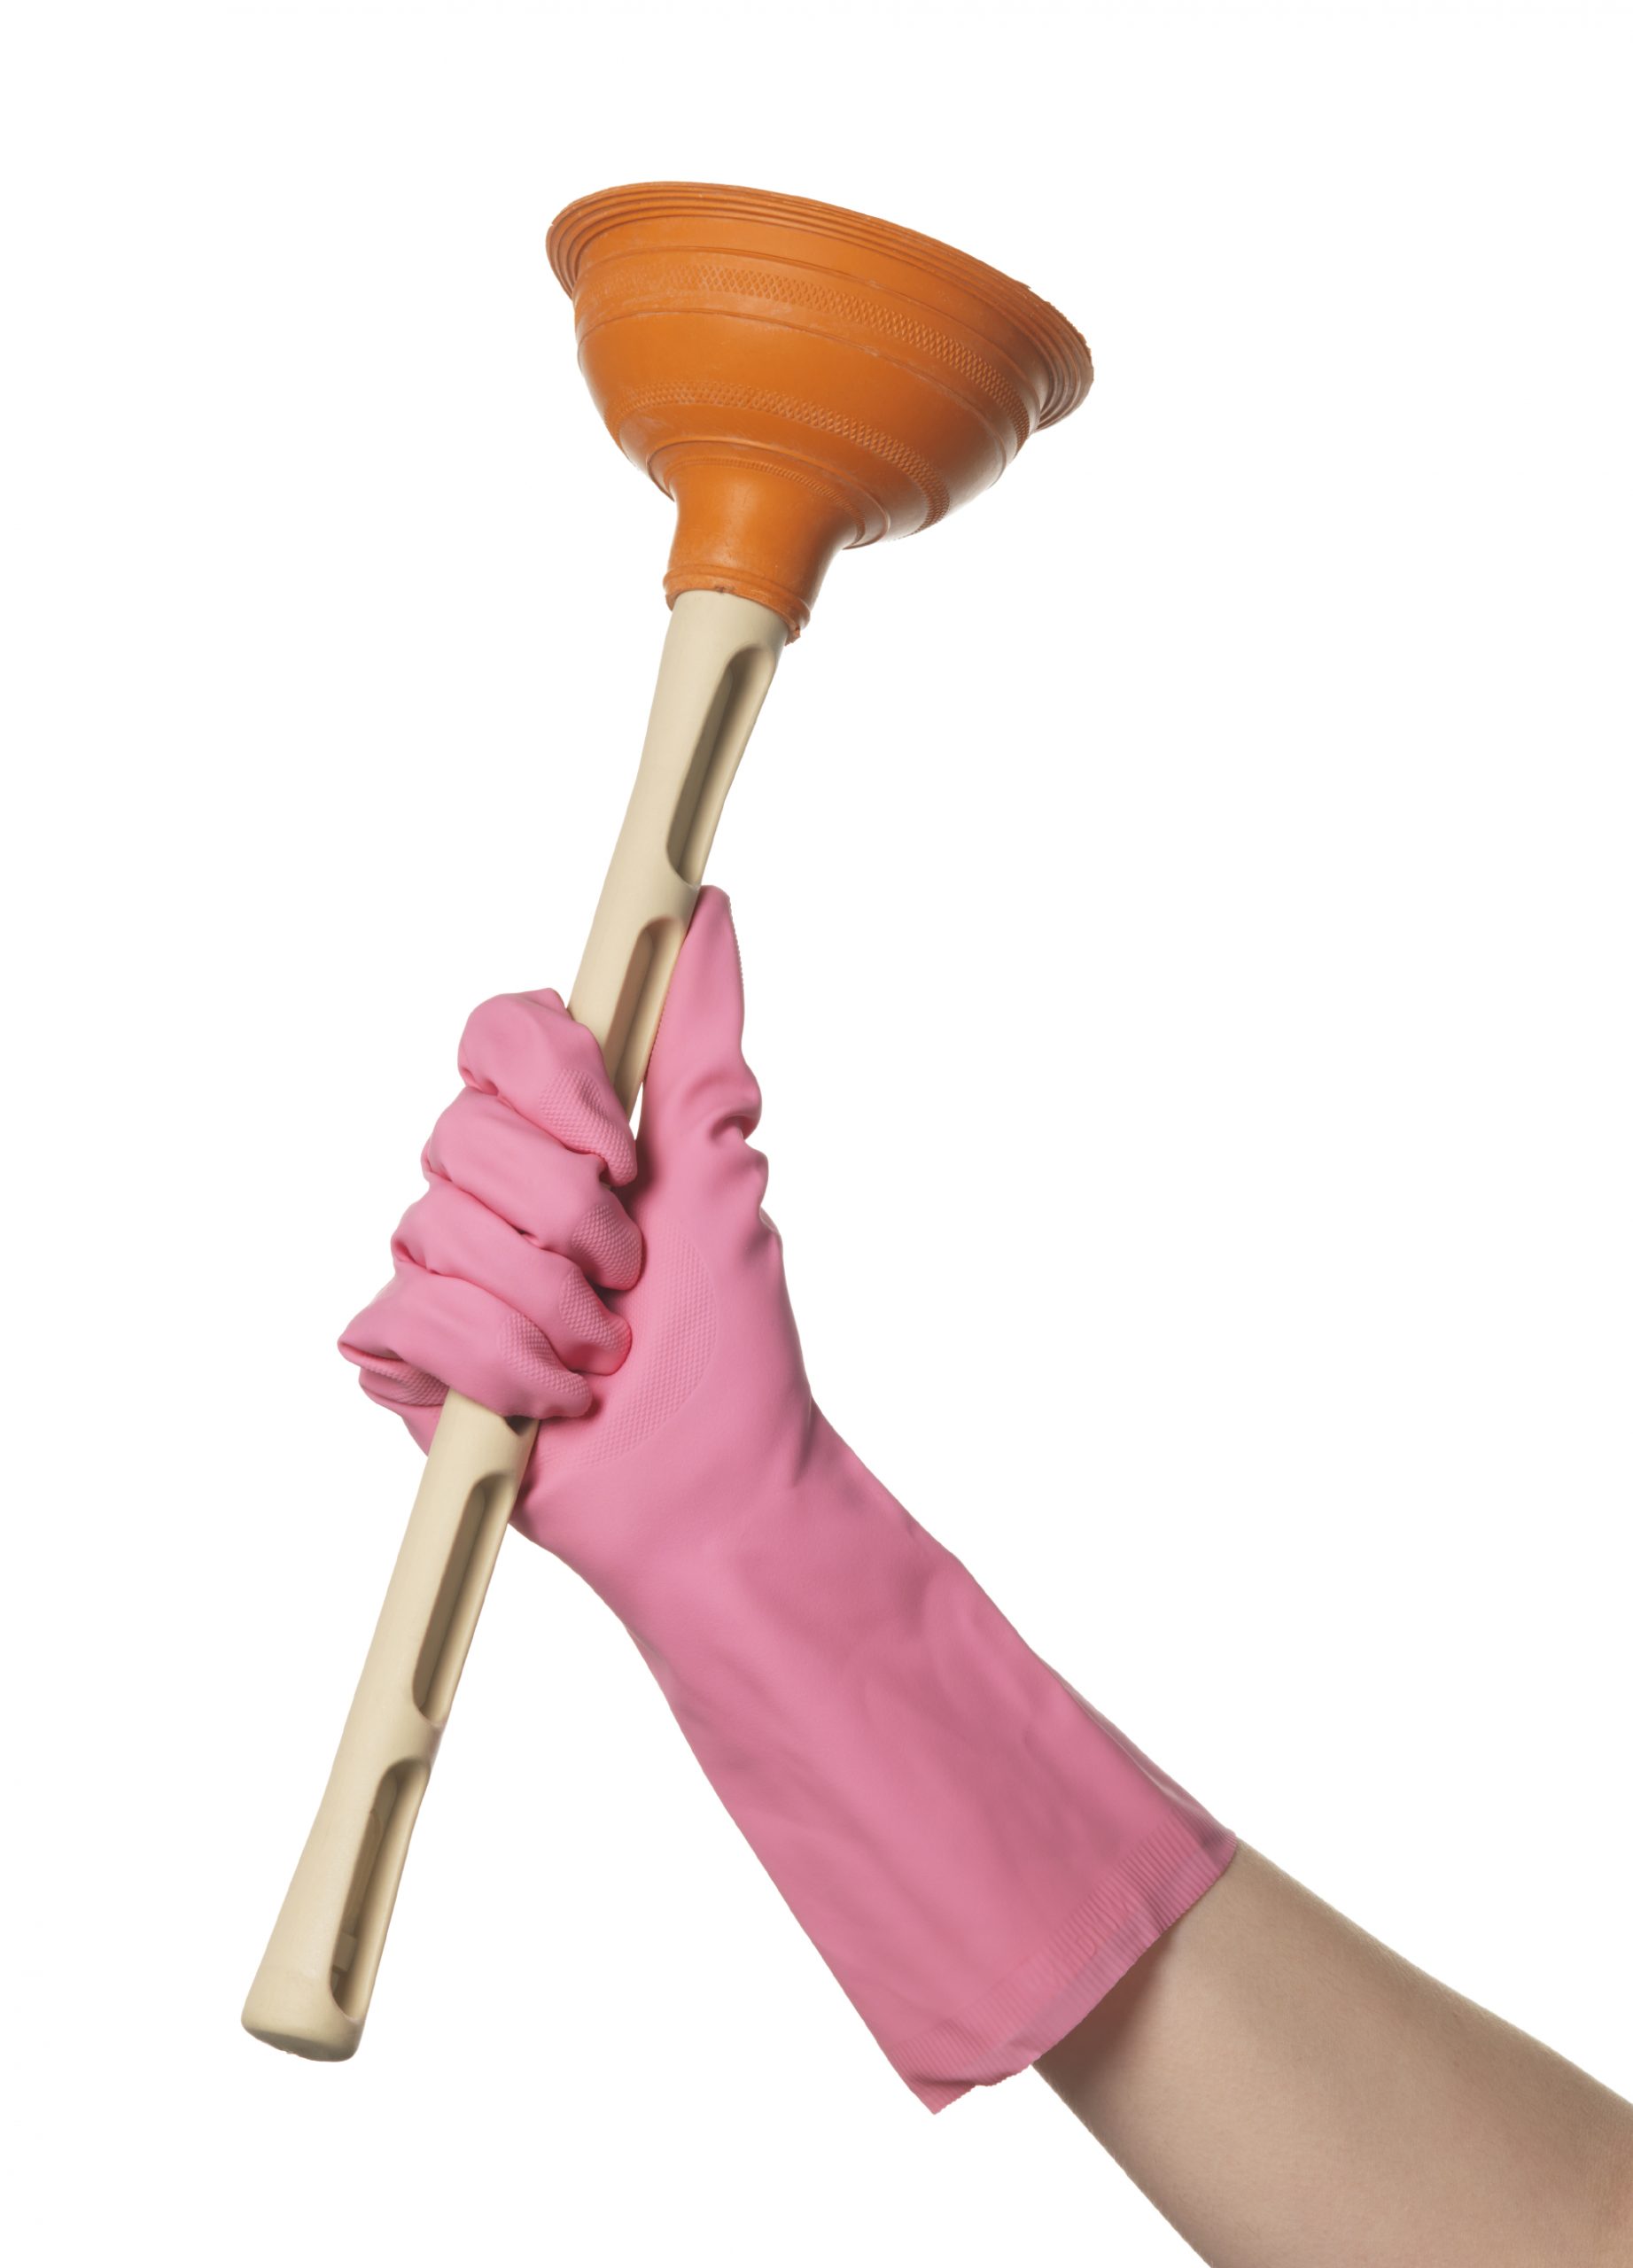 Plunger for Home